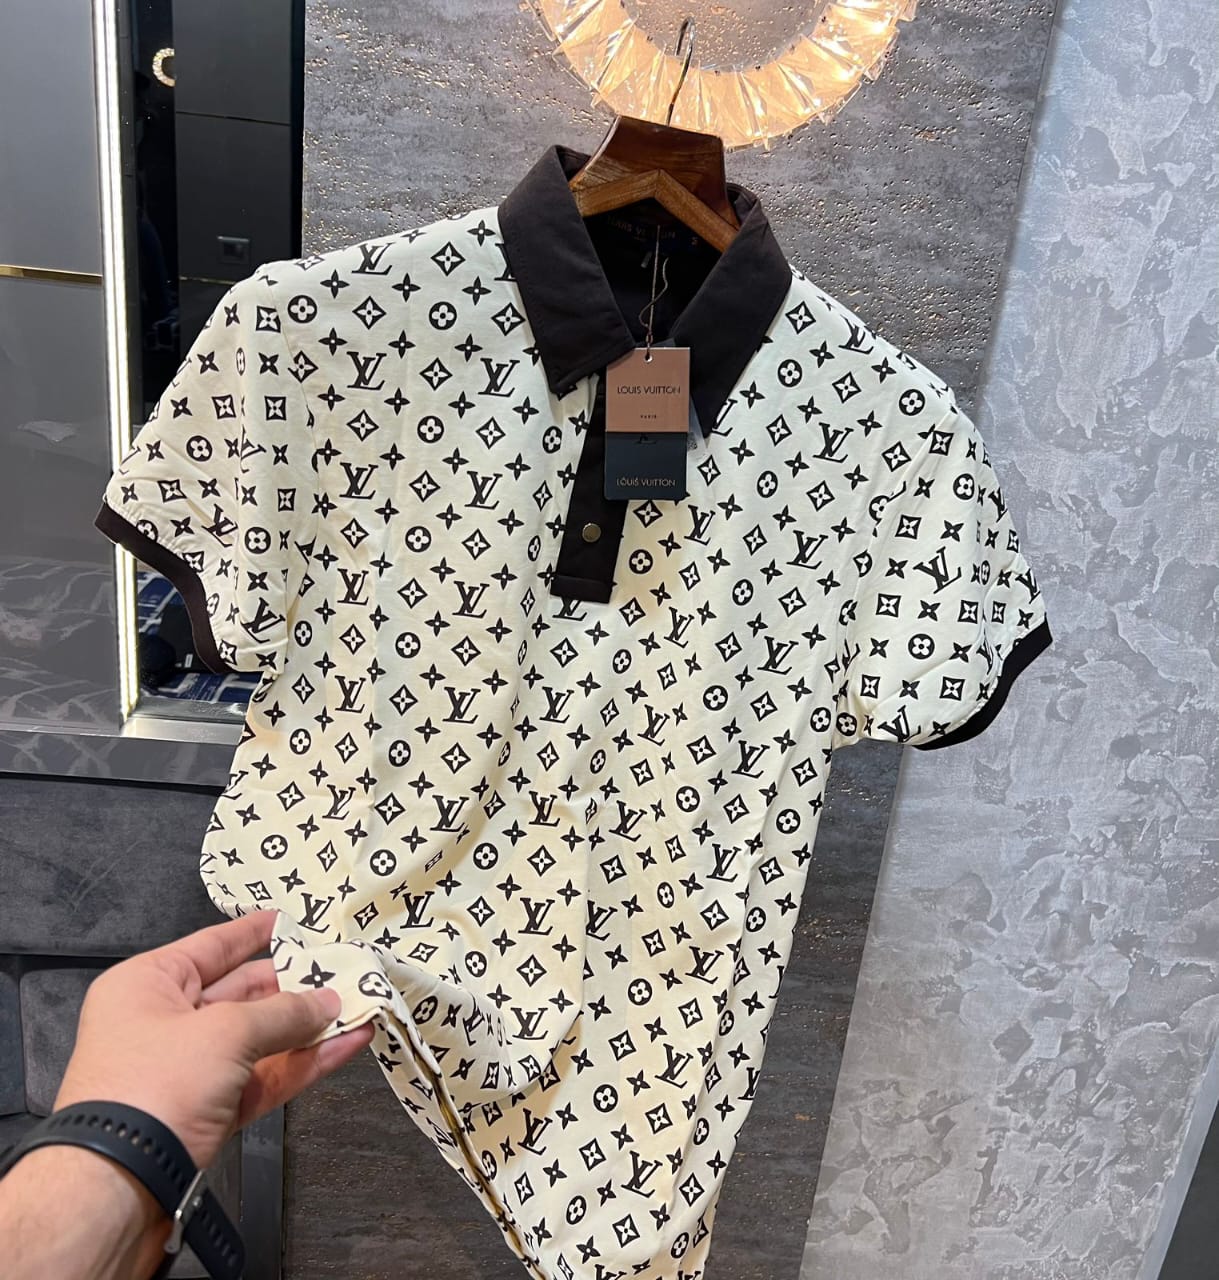 NEW FASHION] Louis Vuitton Premium Luxury Brand T-Shirt Outfit For